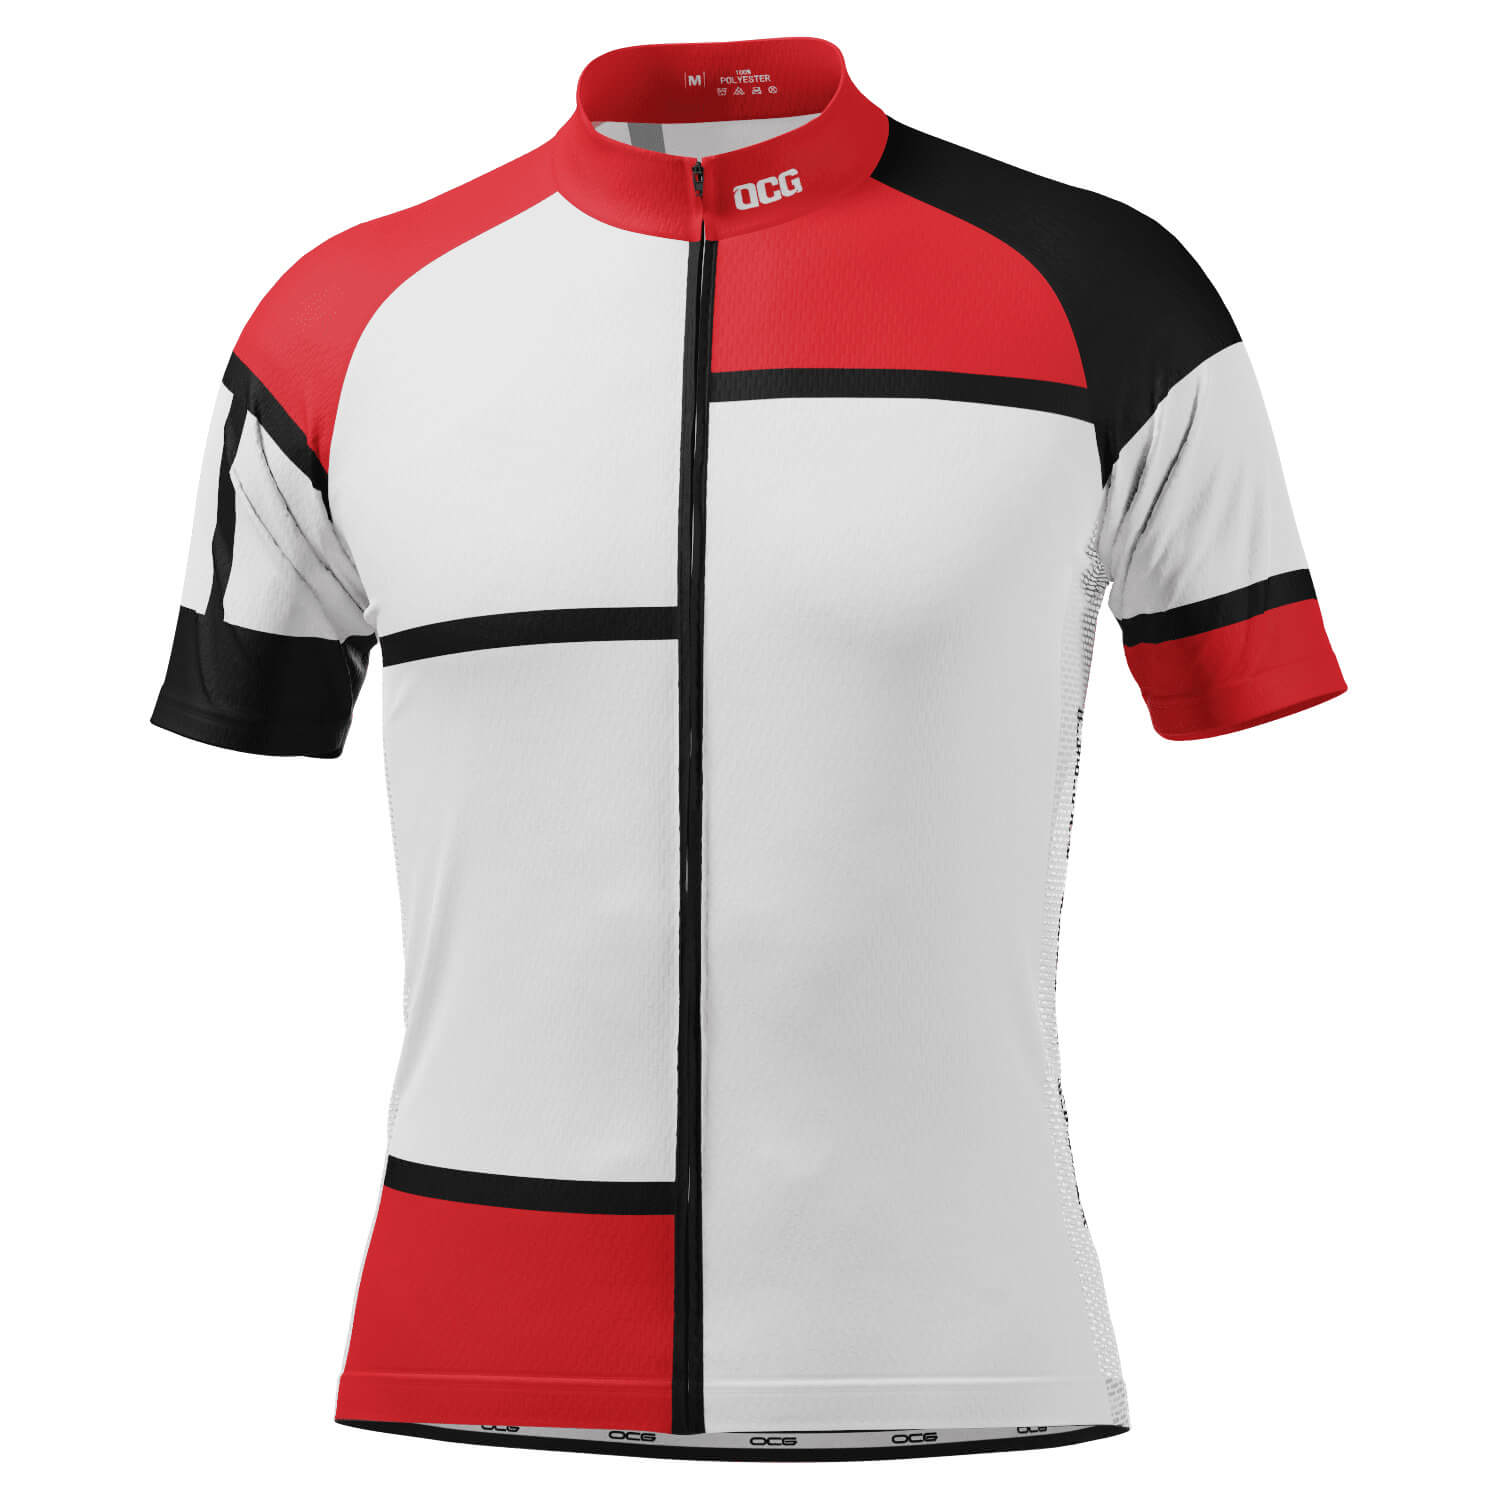 Men's La Vie Claire in Red Short Sleeve Cycling Jersey